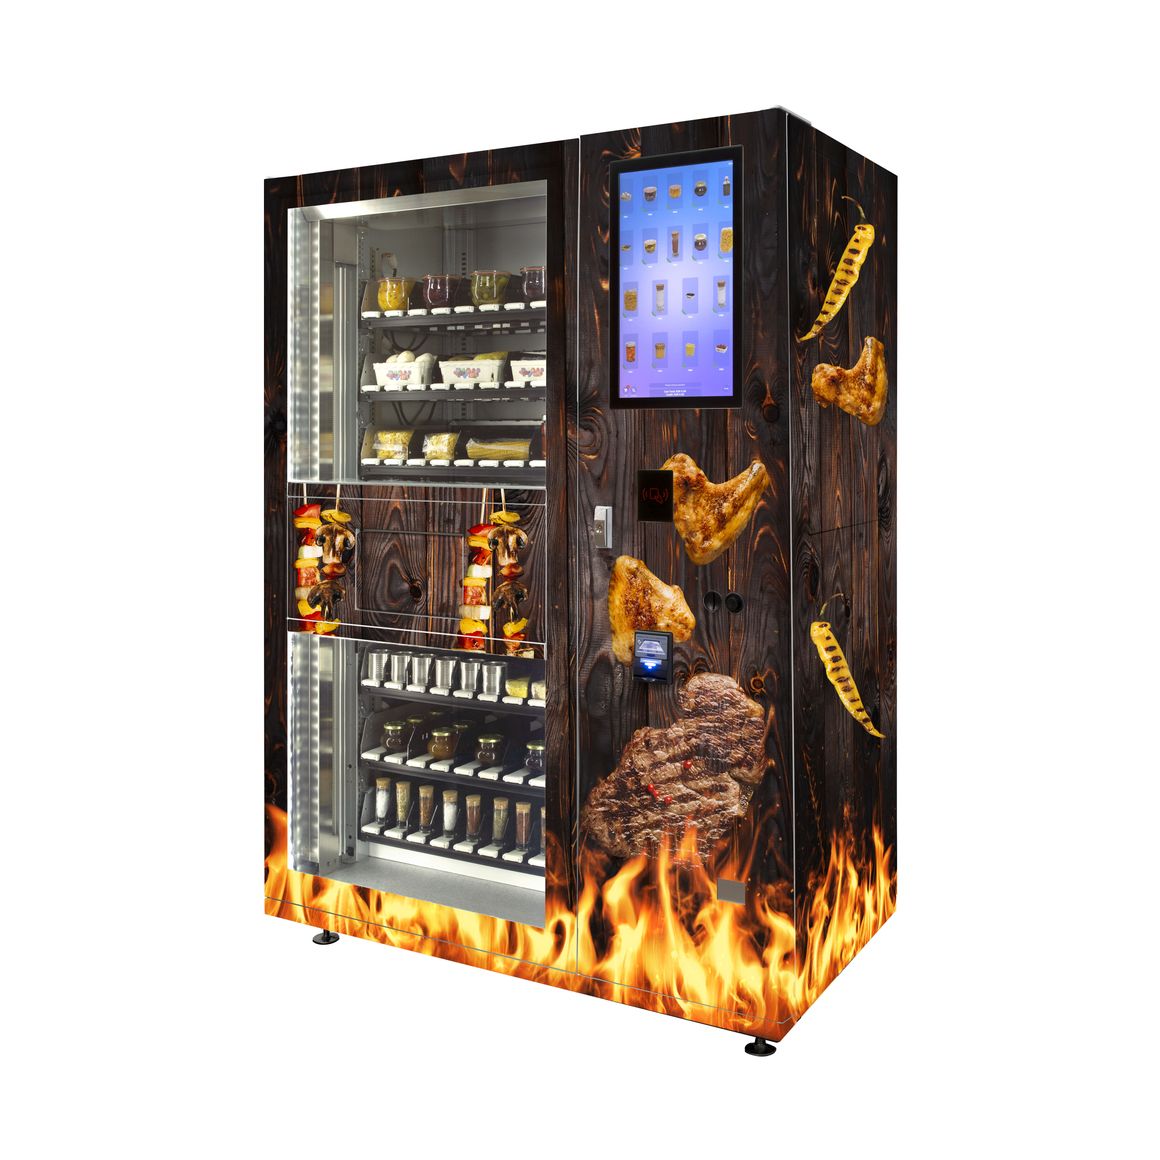 vending machine for bbq meat and cooled sides